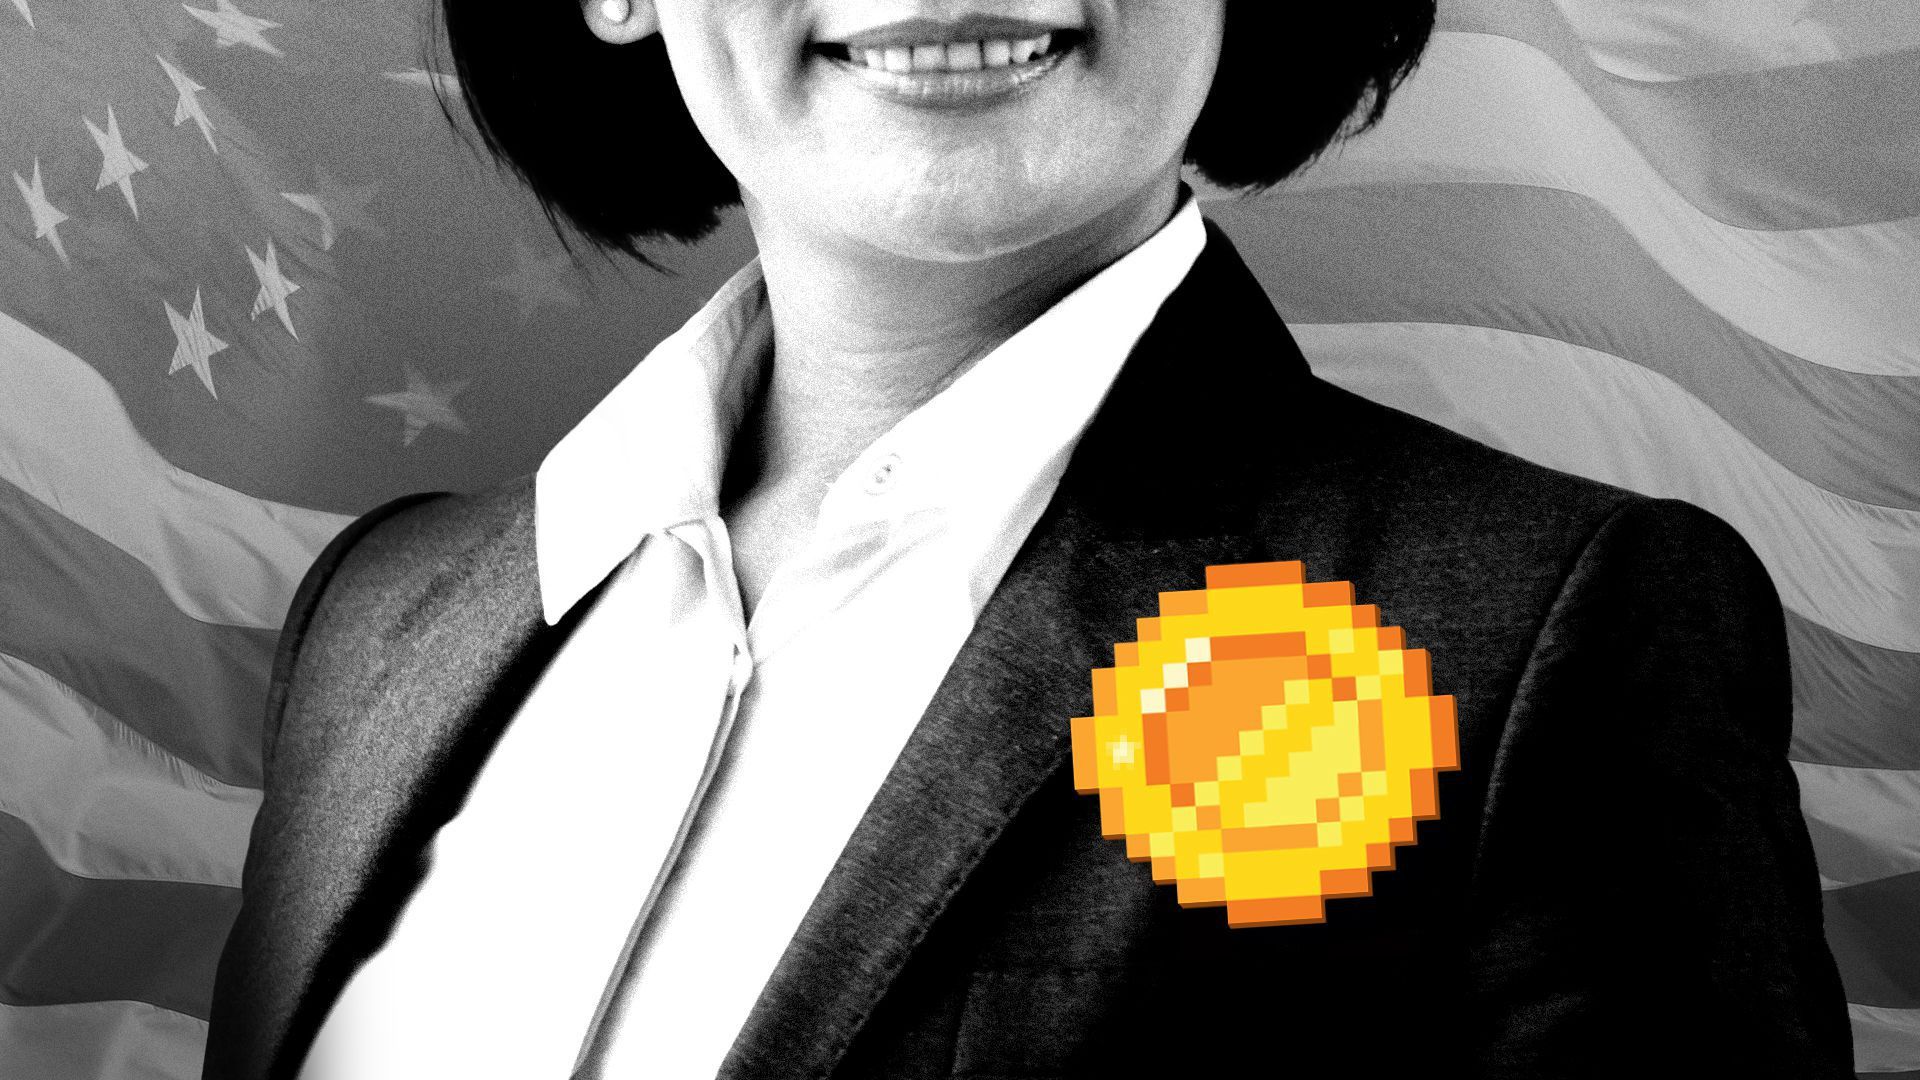 Illustration of a person with a crypto coin as a nametag.